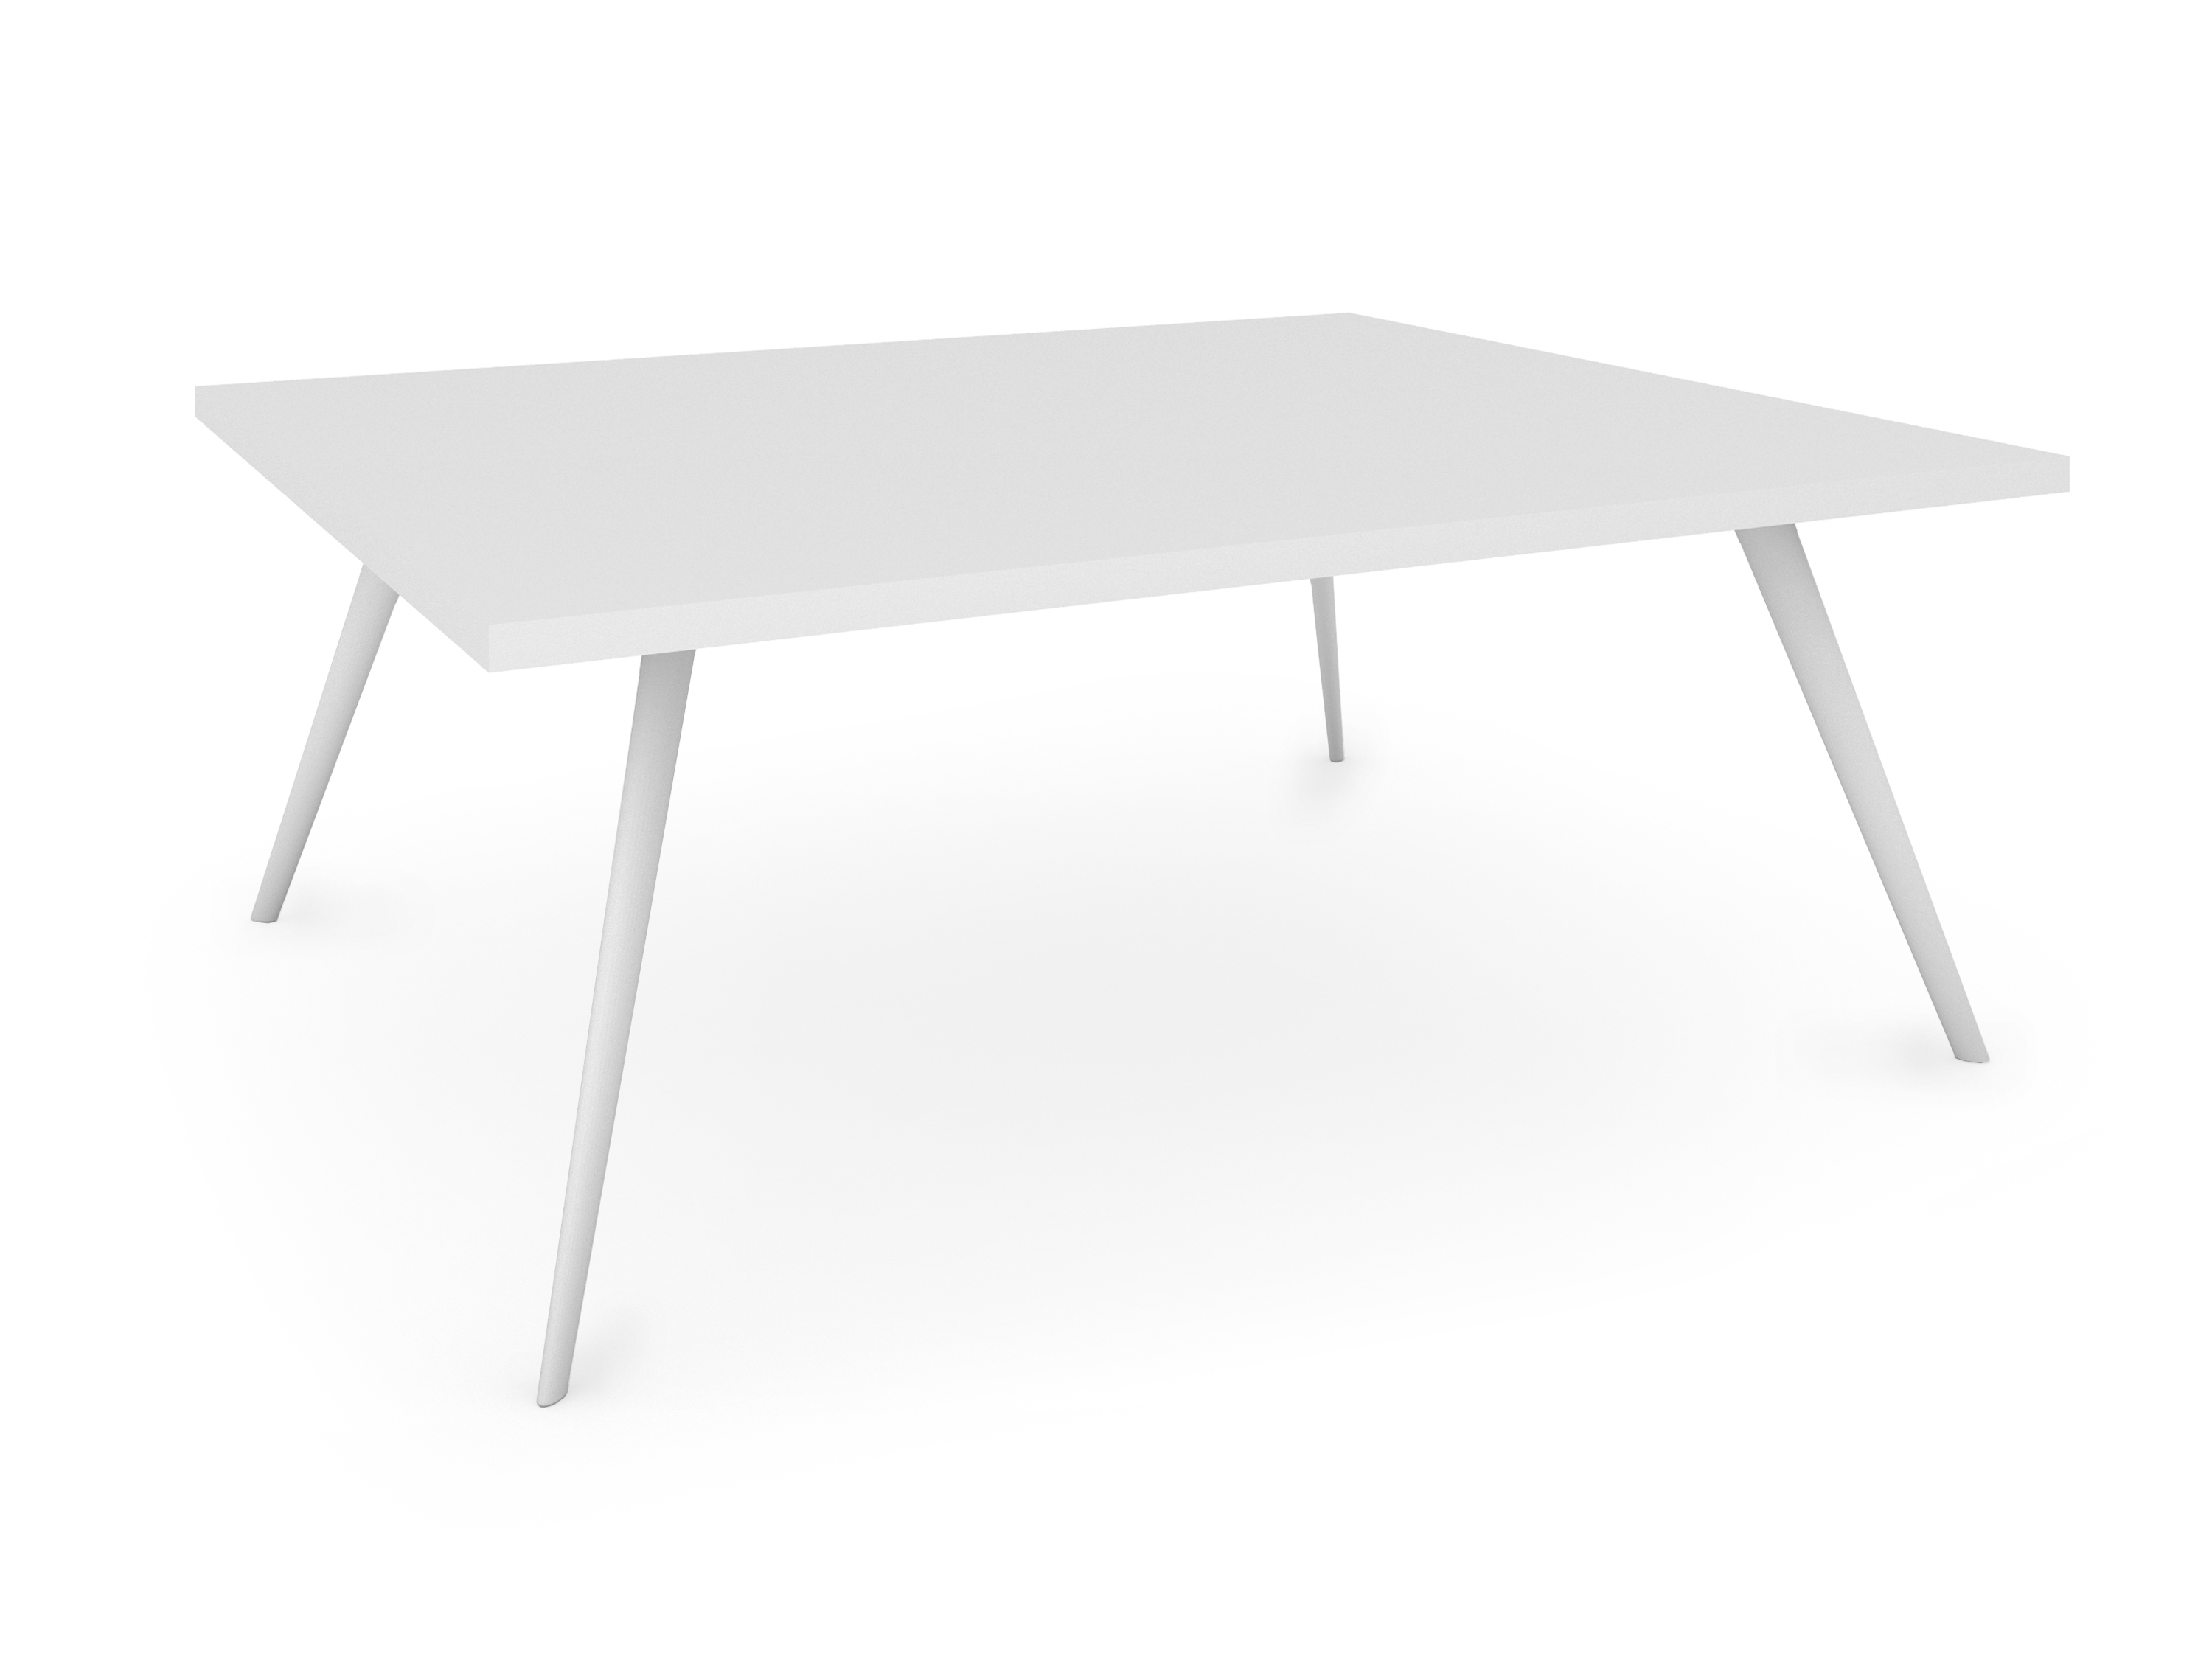 WS - Air coffee table - Rect - All white